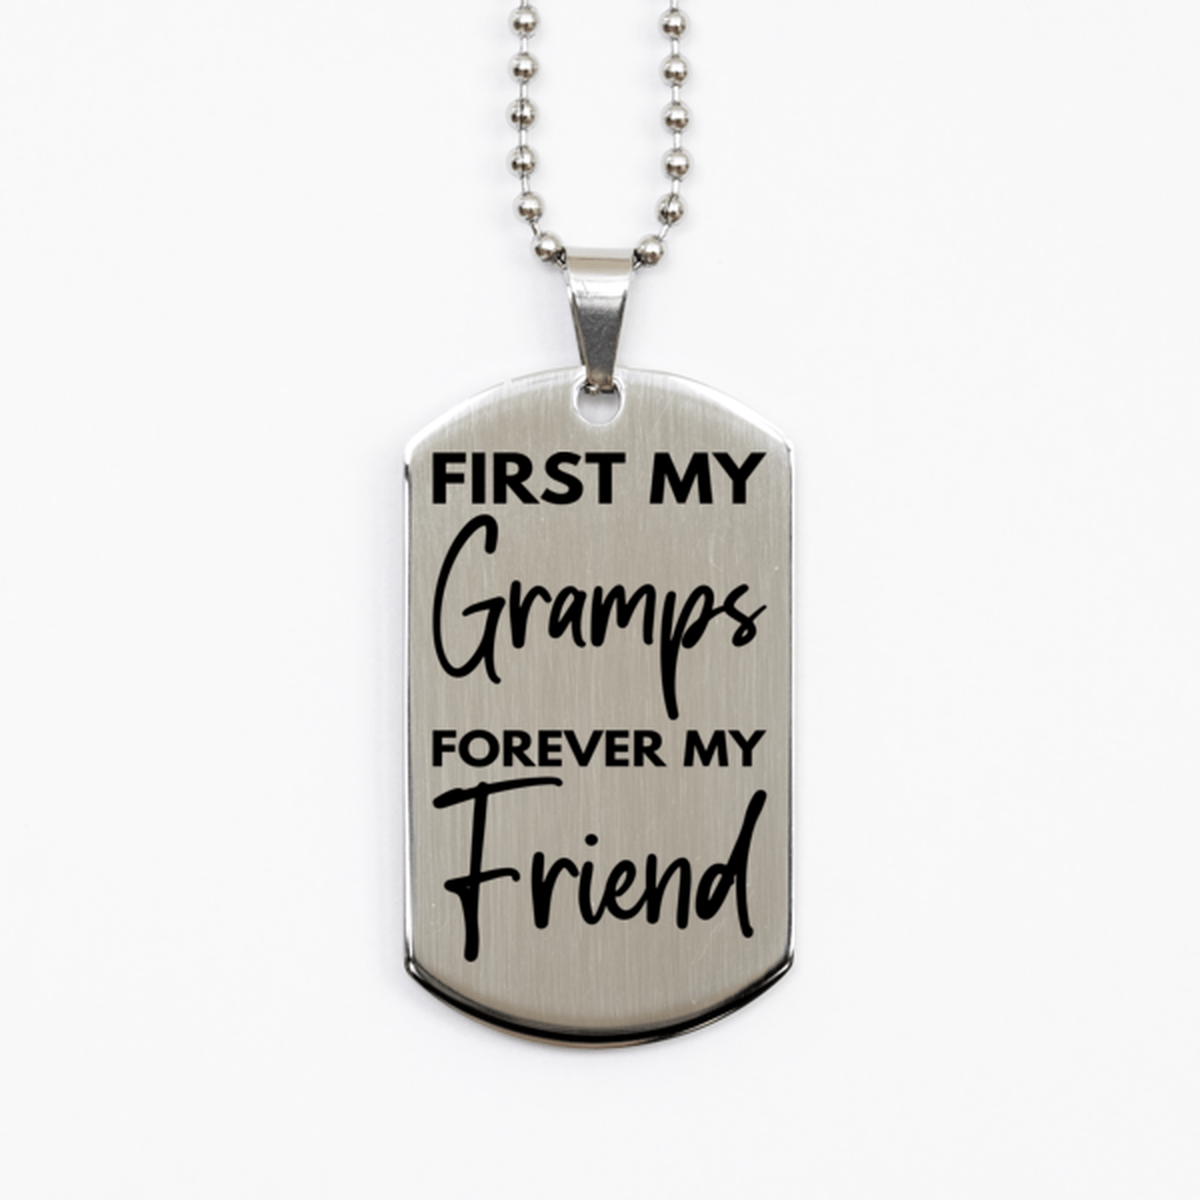 Inspirational Gramps Silver Dog Tag Necklace, First My Gramps Forever My Friend, Best Birthday Gifts for Gramps